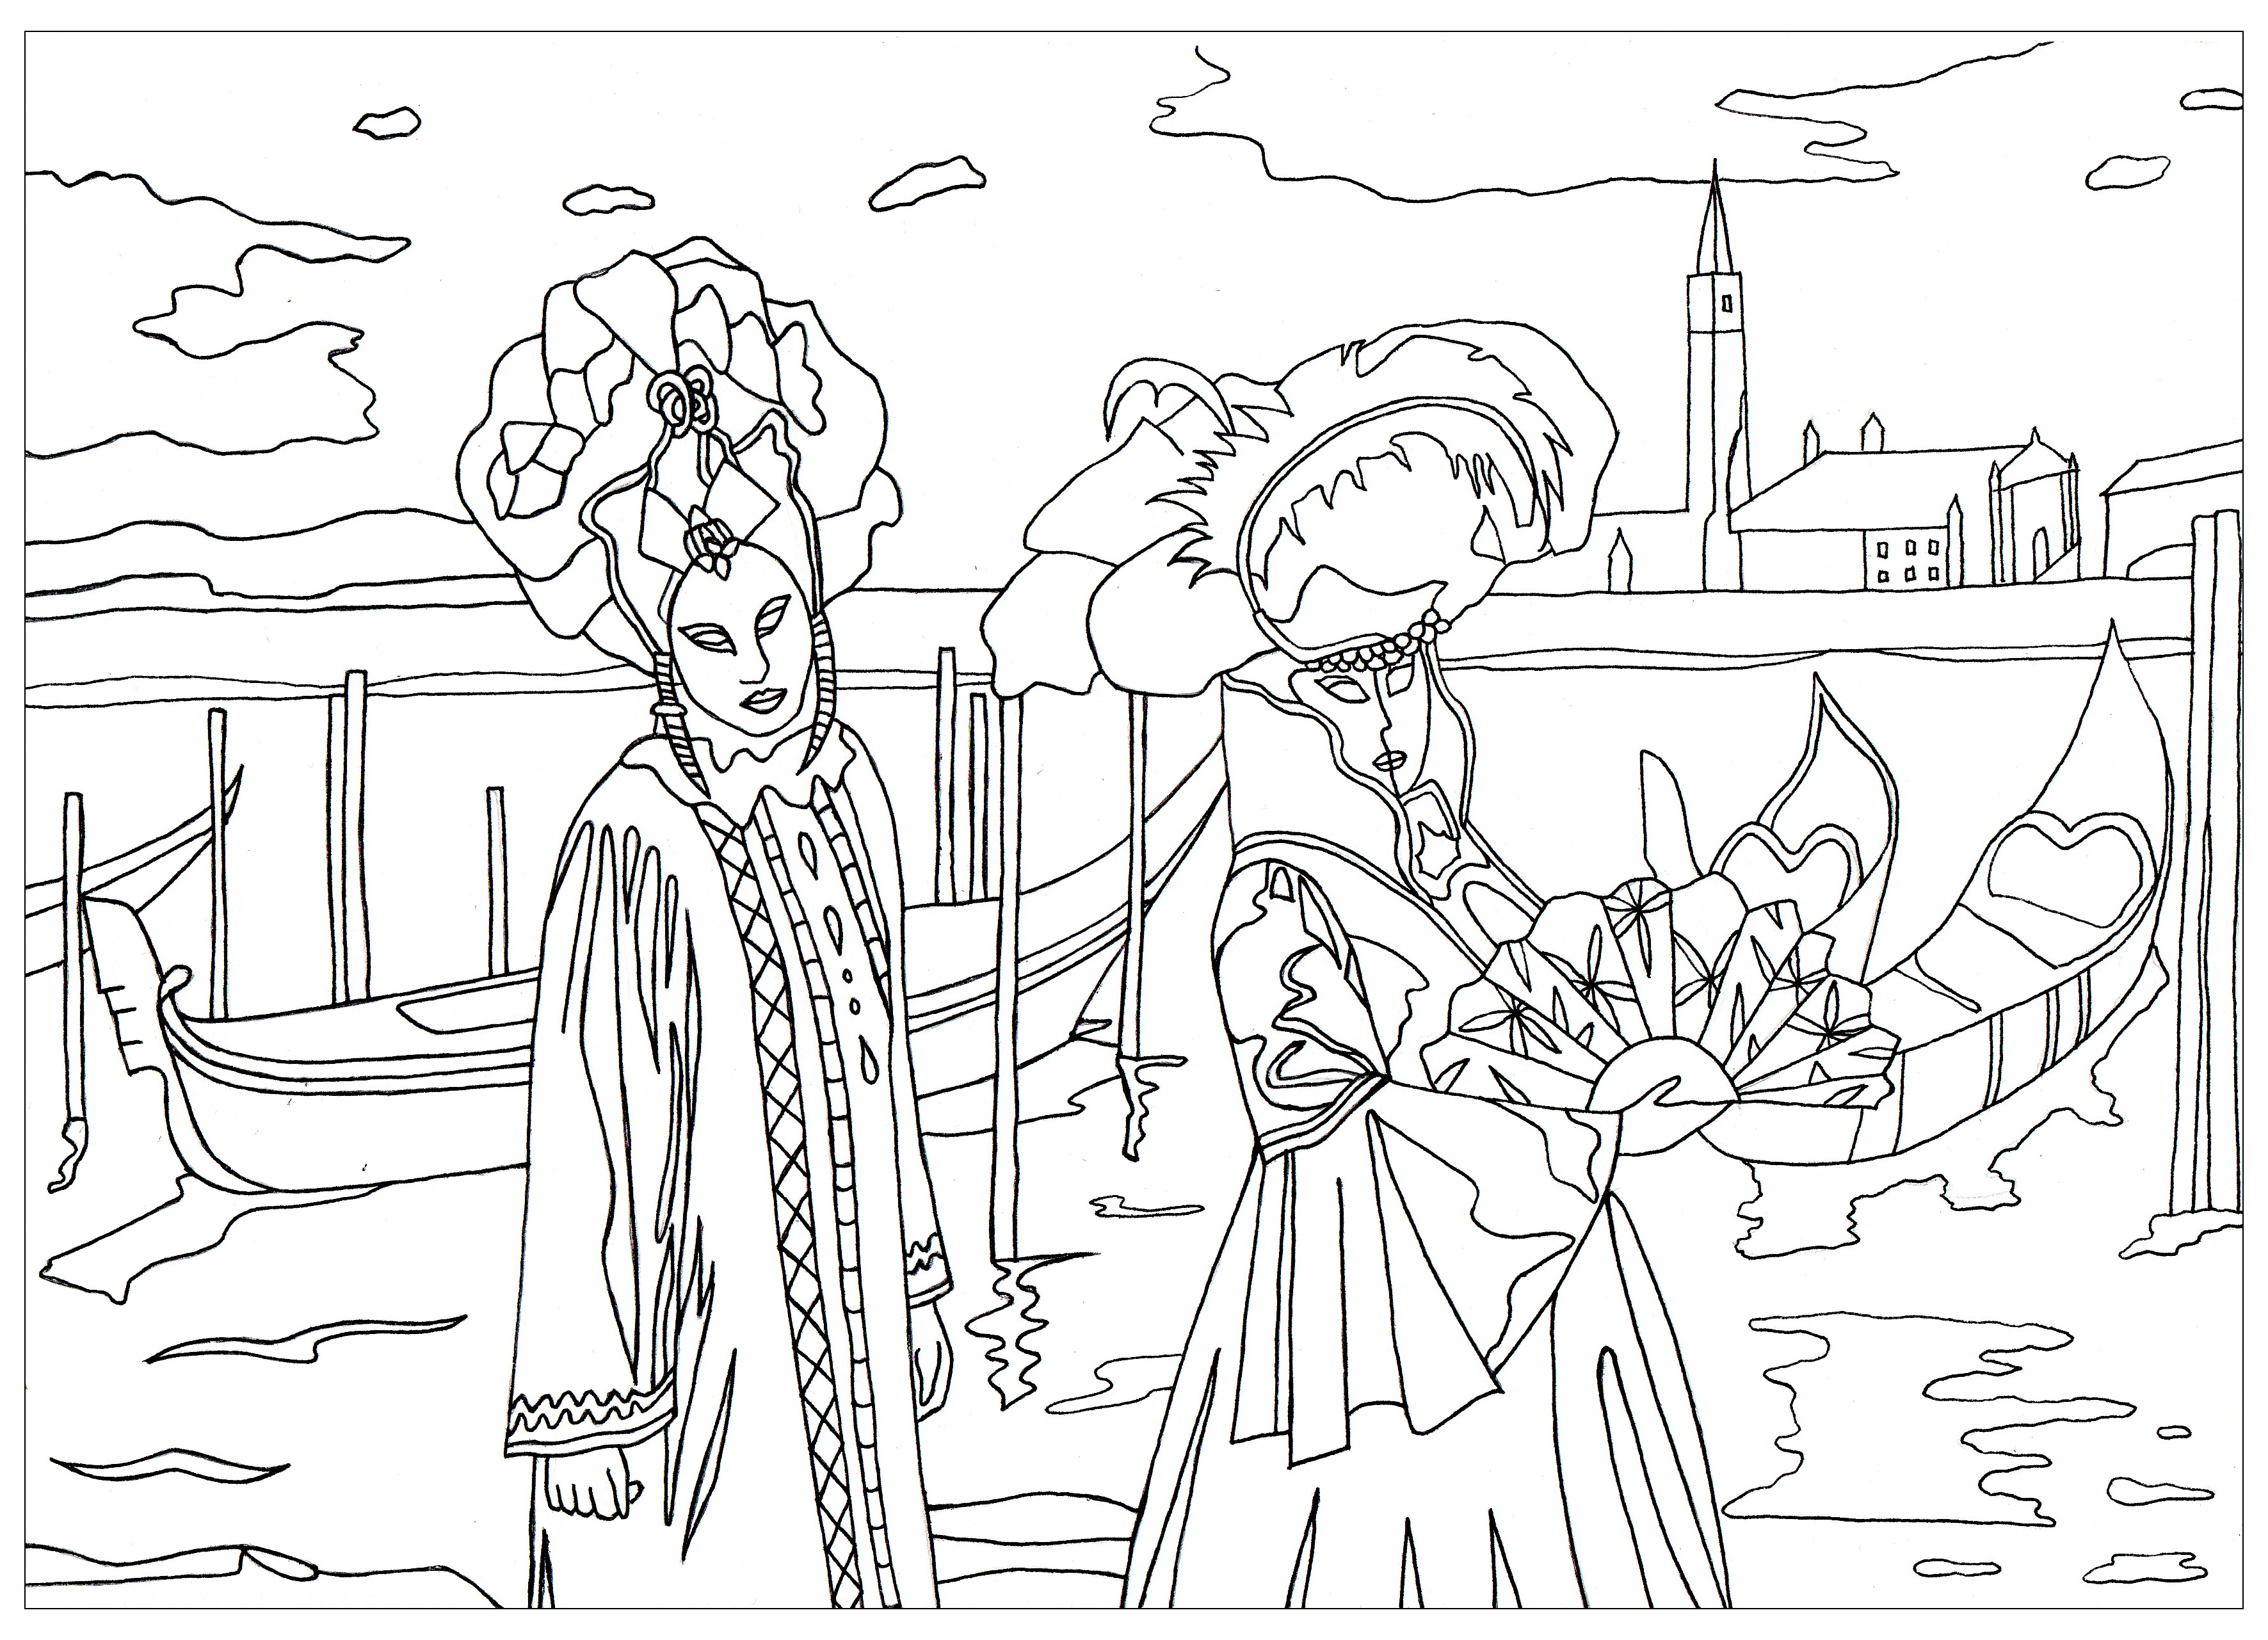 Venice carnival - Anti stress Adult Coloring Pages